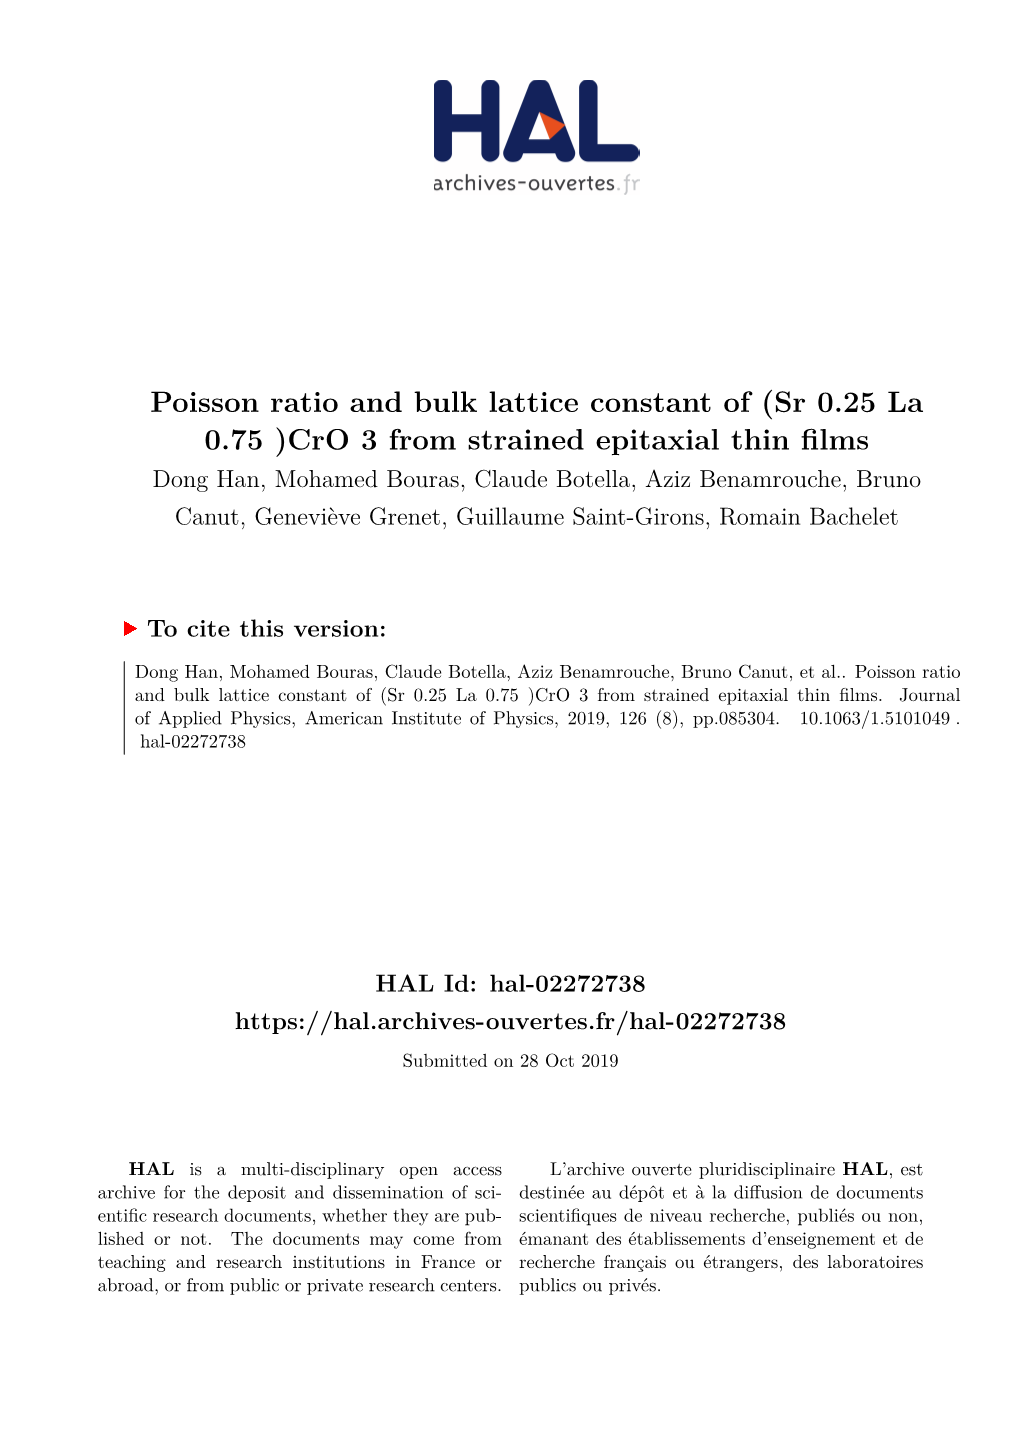 Poisson Ratio and Bulk Lattice Constant of (Sr 0.25 La 0.75 )Cro 3 from Strained Epitaxial Thin Films